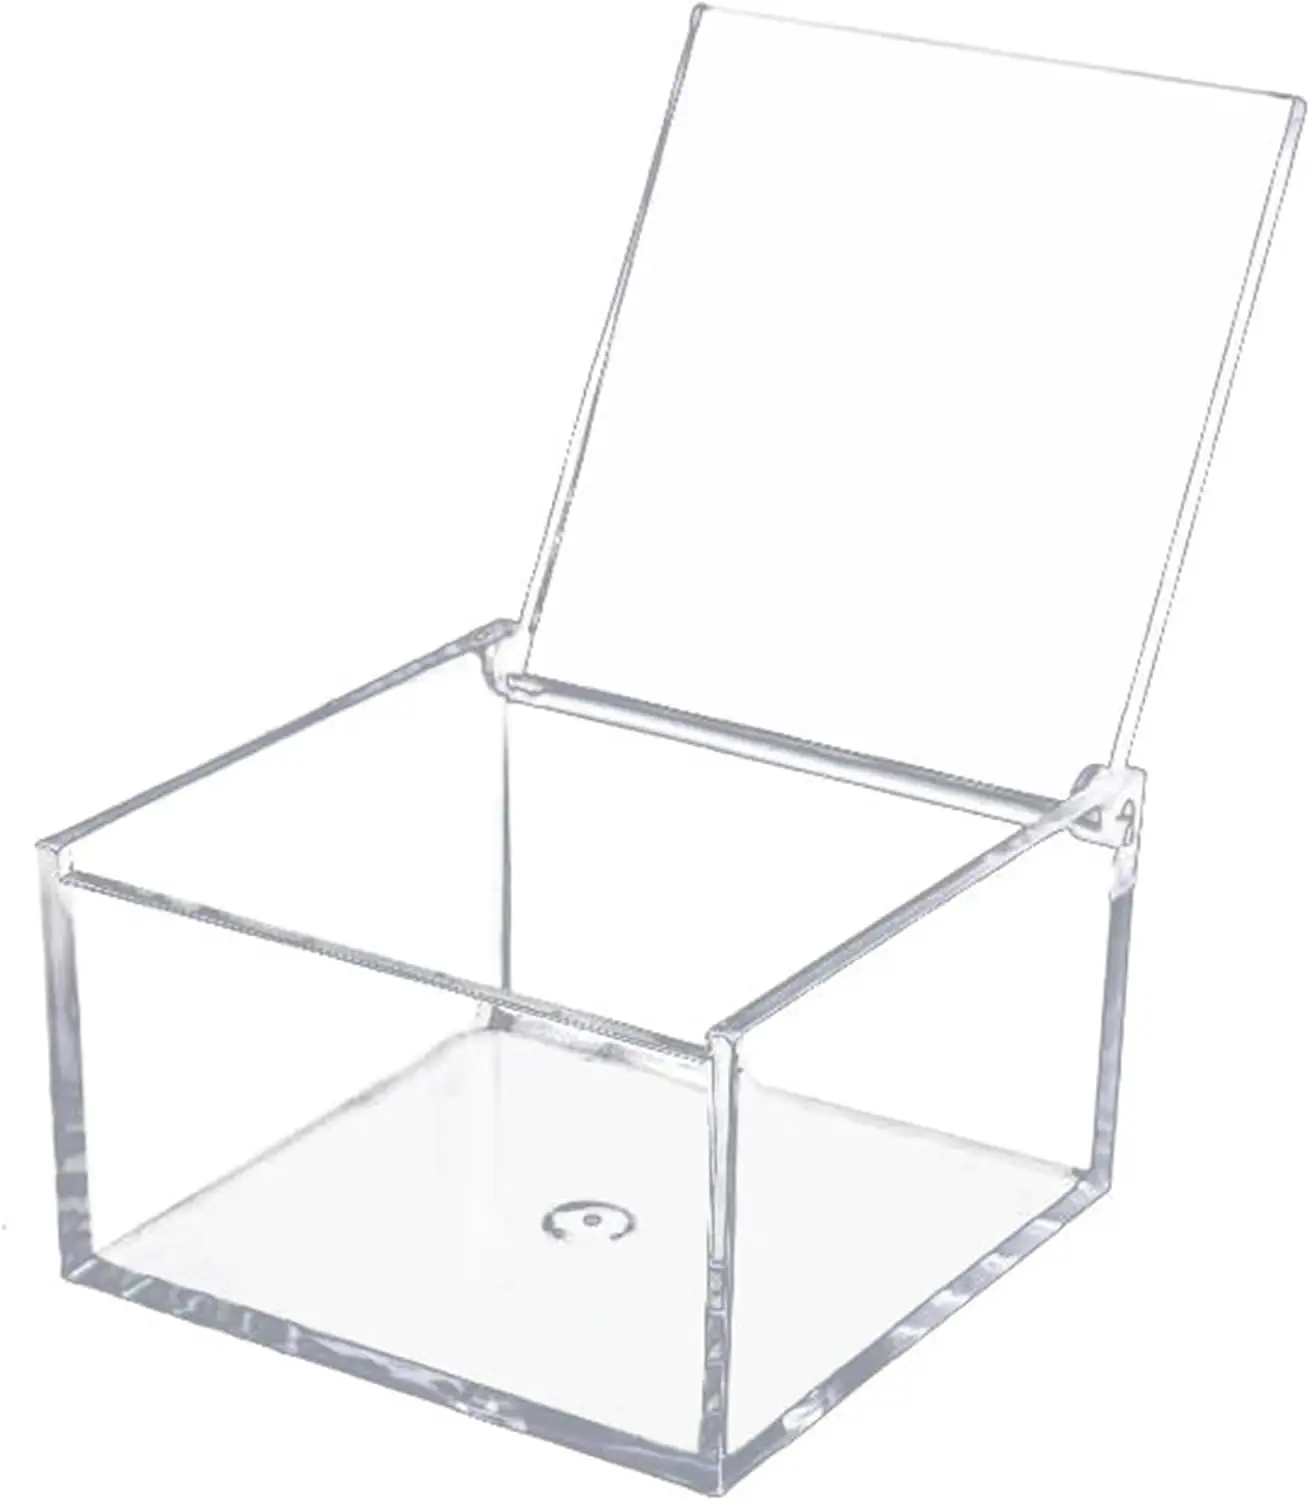 Acrylic Box Large Clear Acrylic Boxes with Hinged Lids Transparent Display Square Cube Storage Organizer Containers for Candy